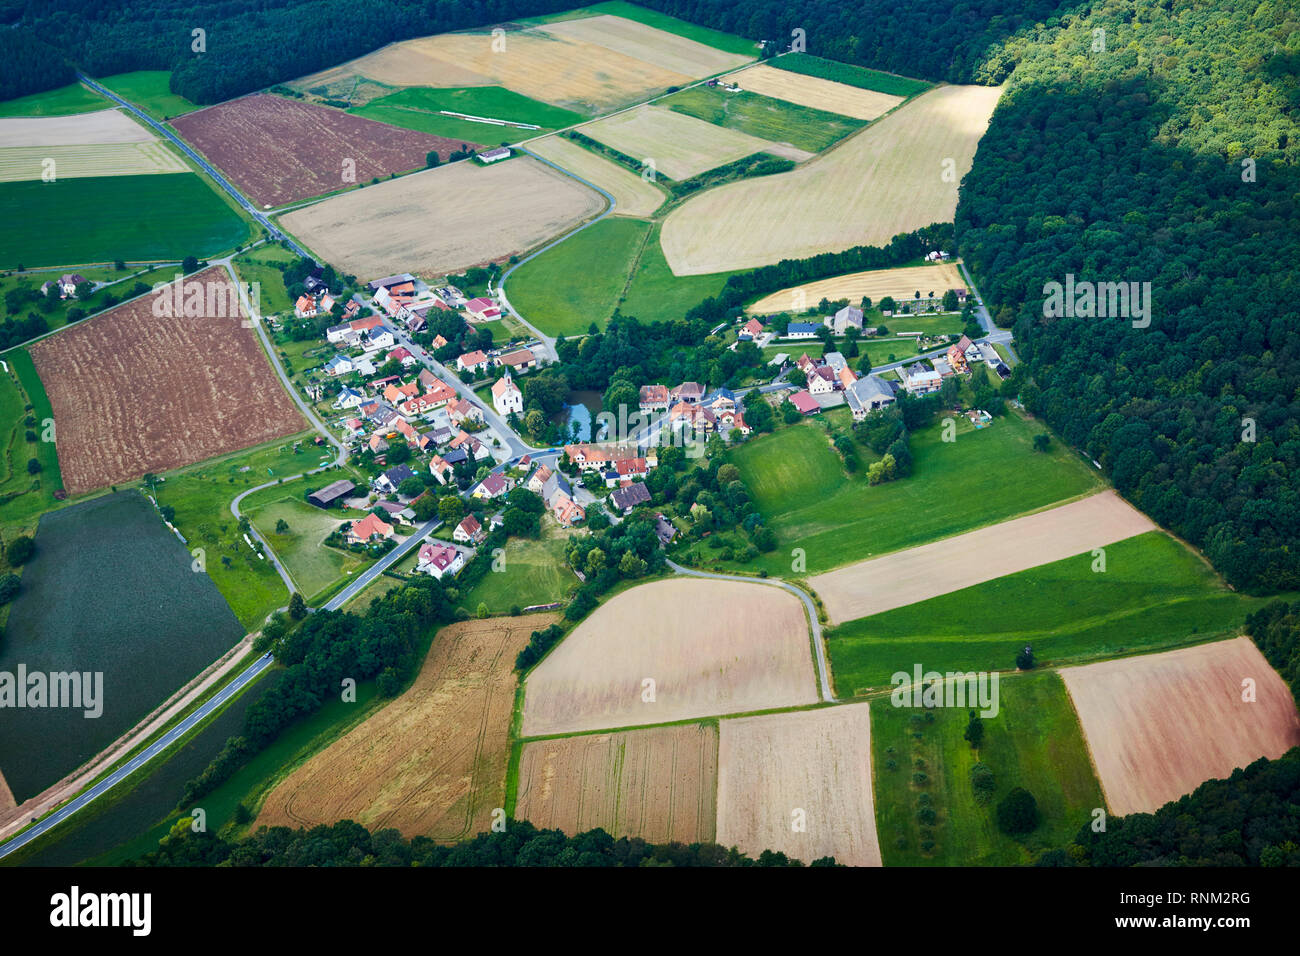 The town Fabrikschleichach seen from the air. Municipality Rauhenebrach, district of Hassberg, Bavaria, Germany Stock Photo